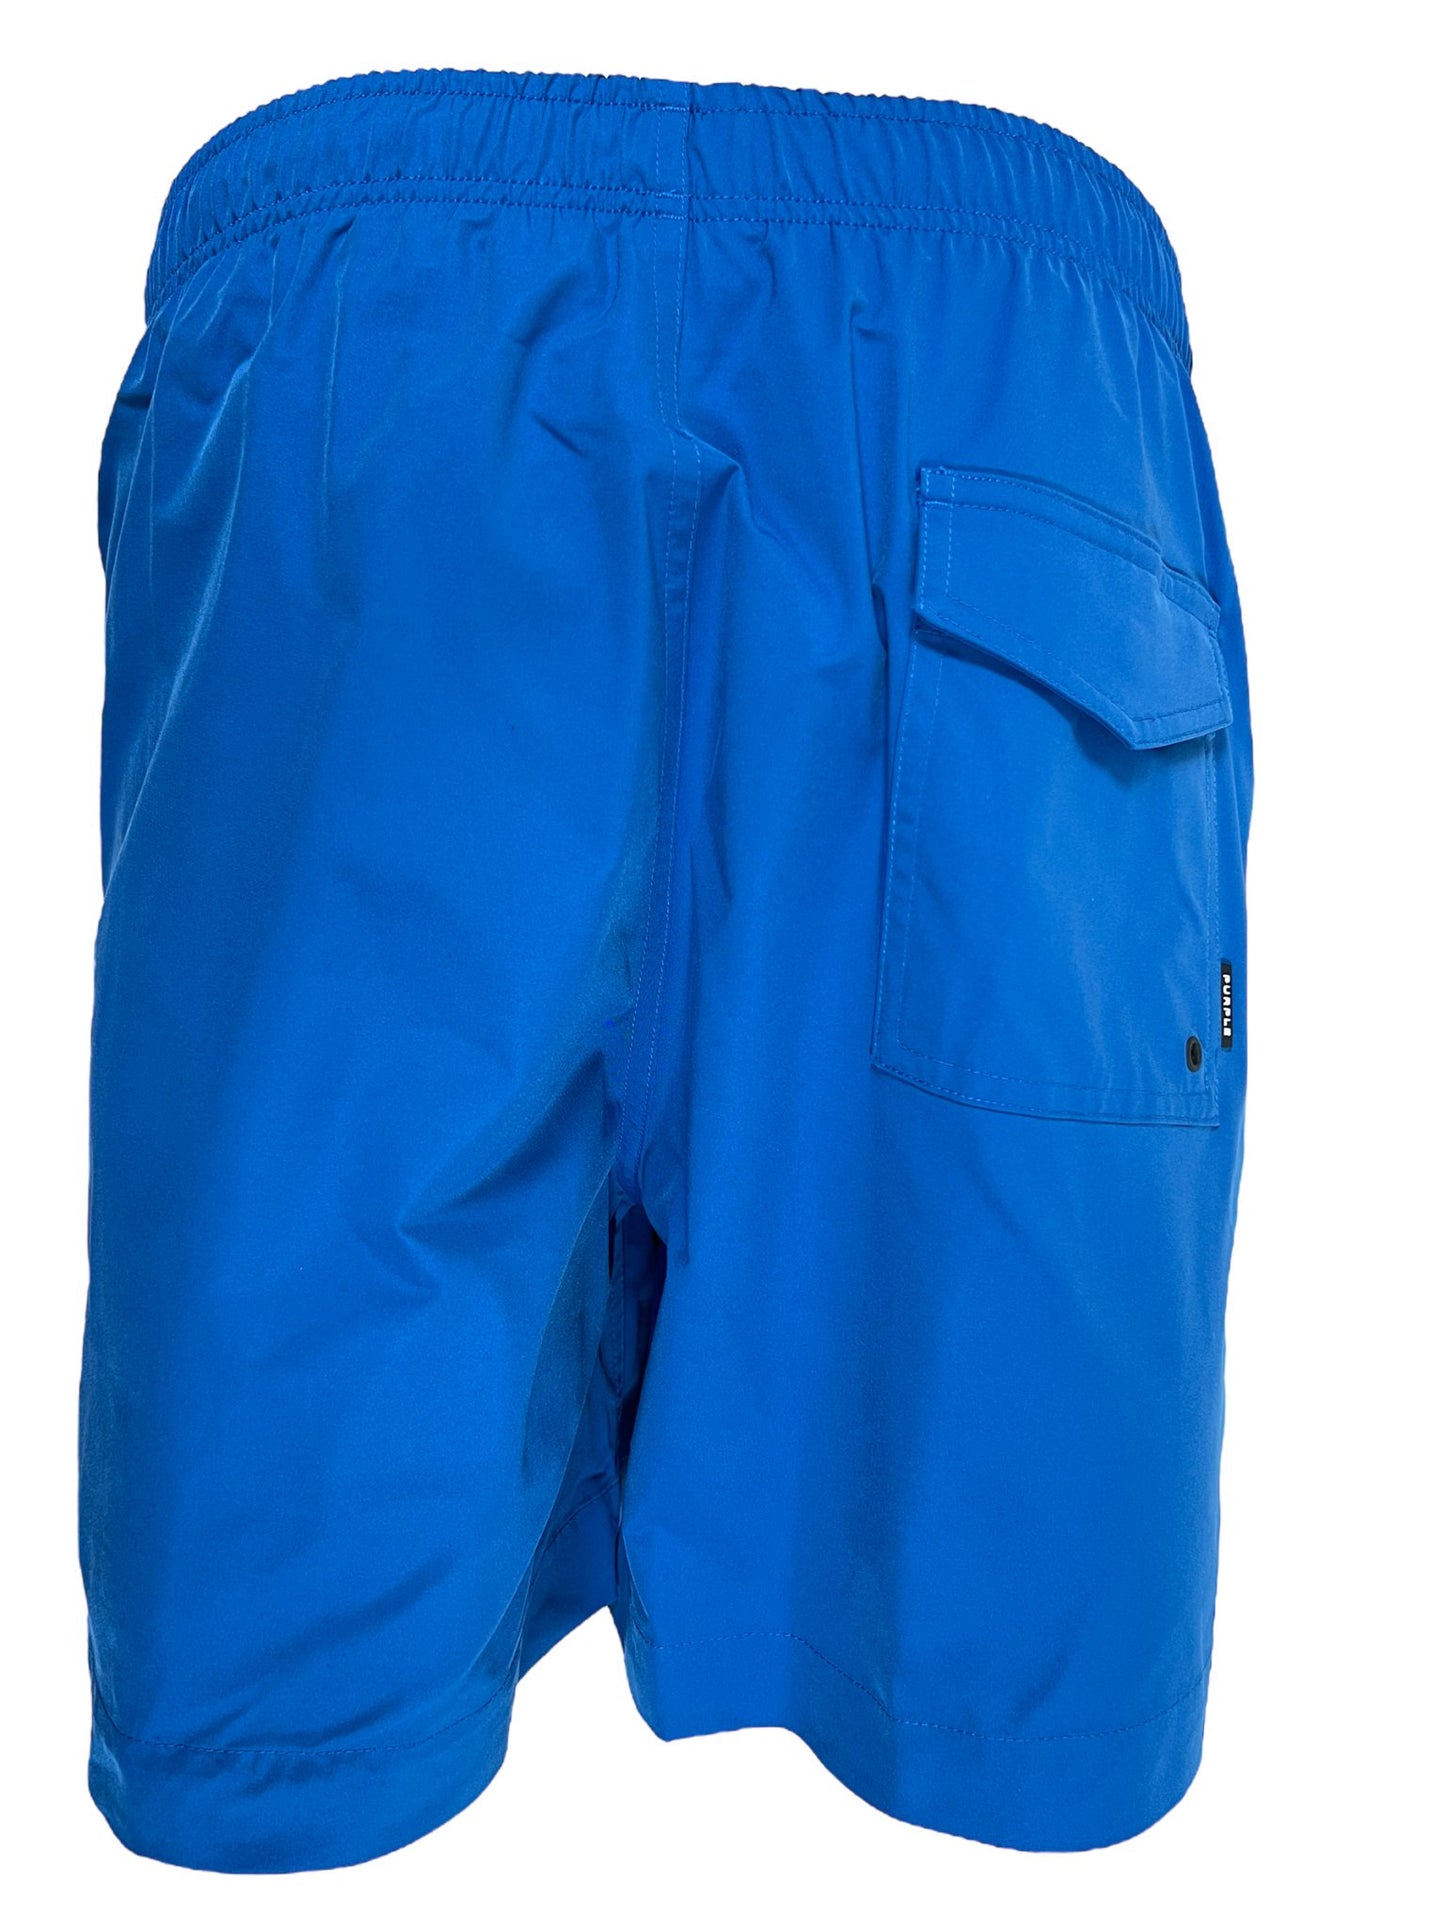 PURPLE BRAND P504-PCBU ALL ROUND SHORT BLUE swimming trunks with a side pocket.